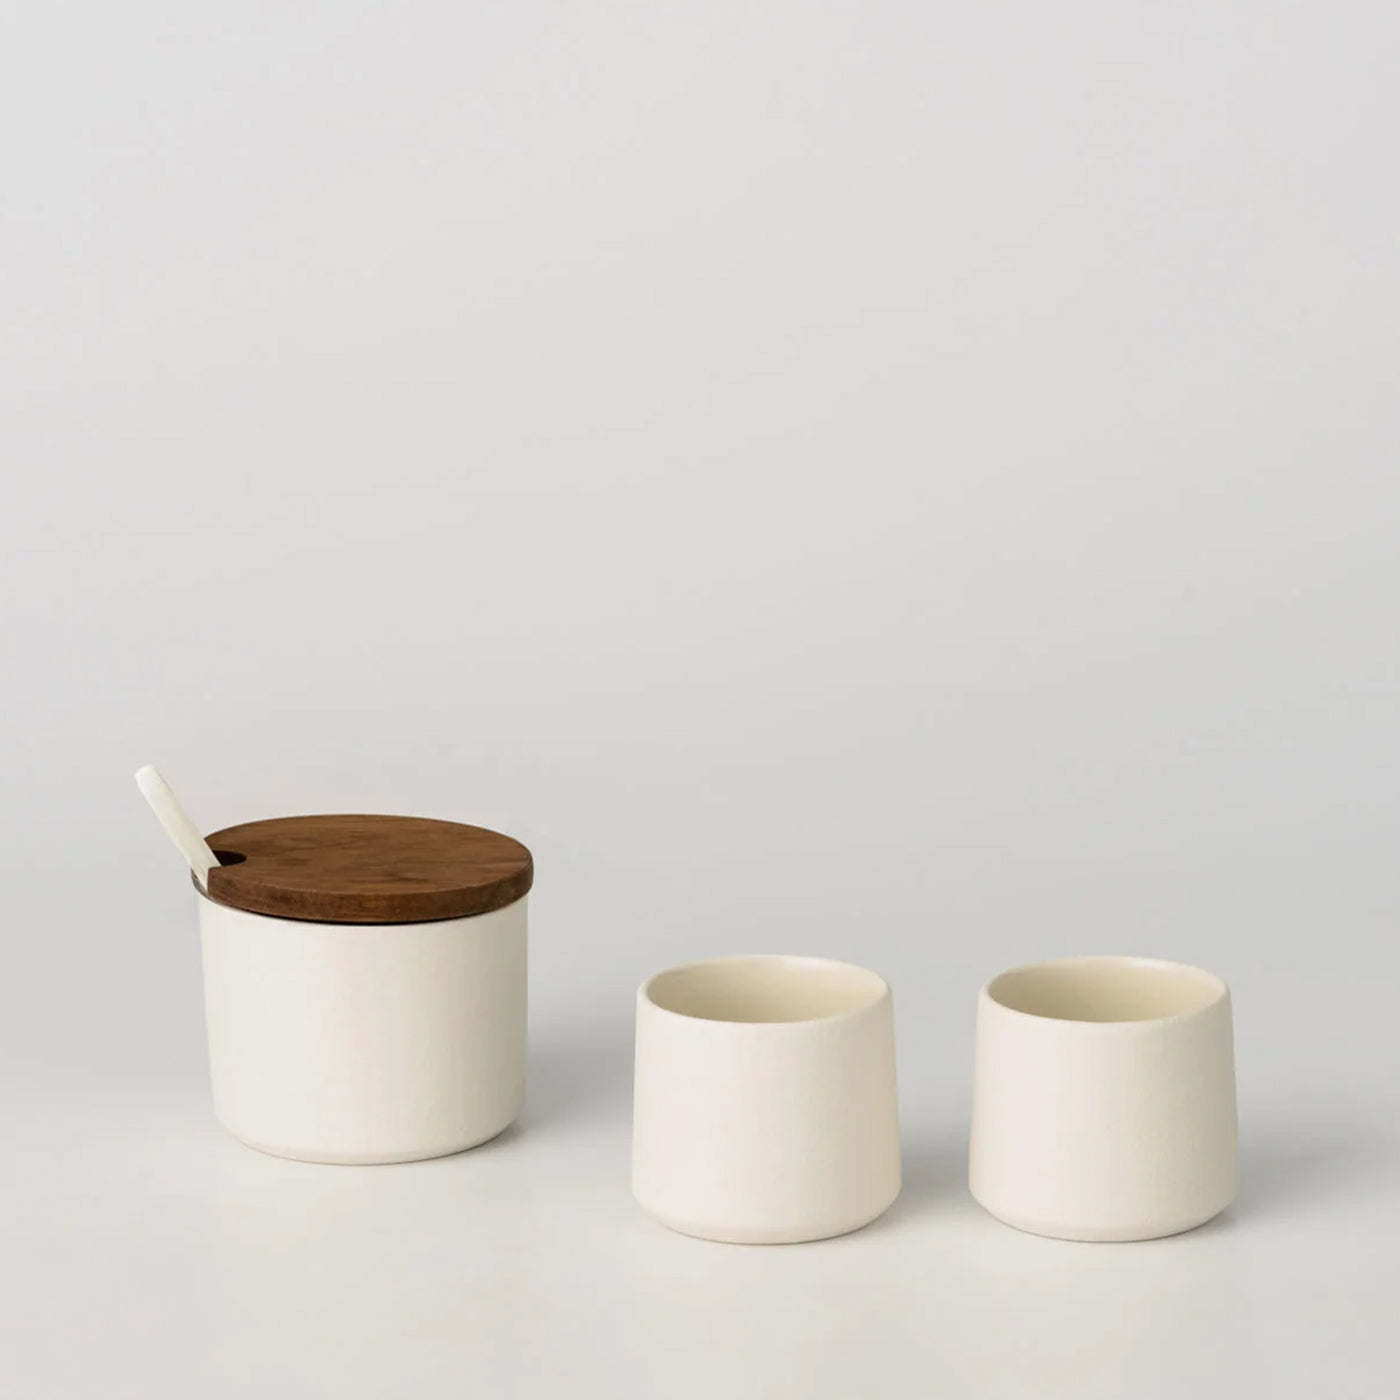 Ceramic Sugar Bowl with Wooden Lid and Small Ceramic Cups - Alternative view 4